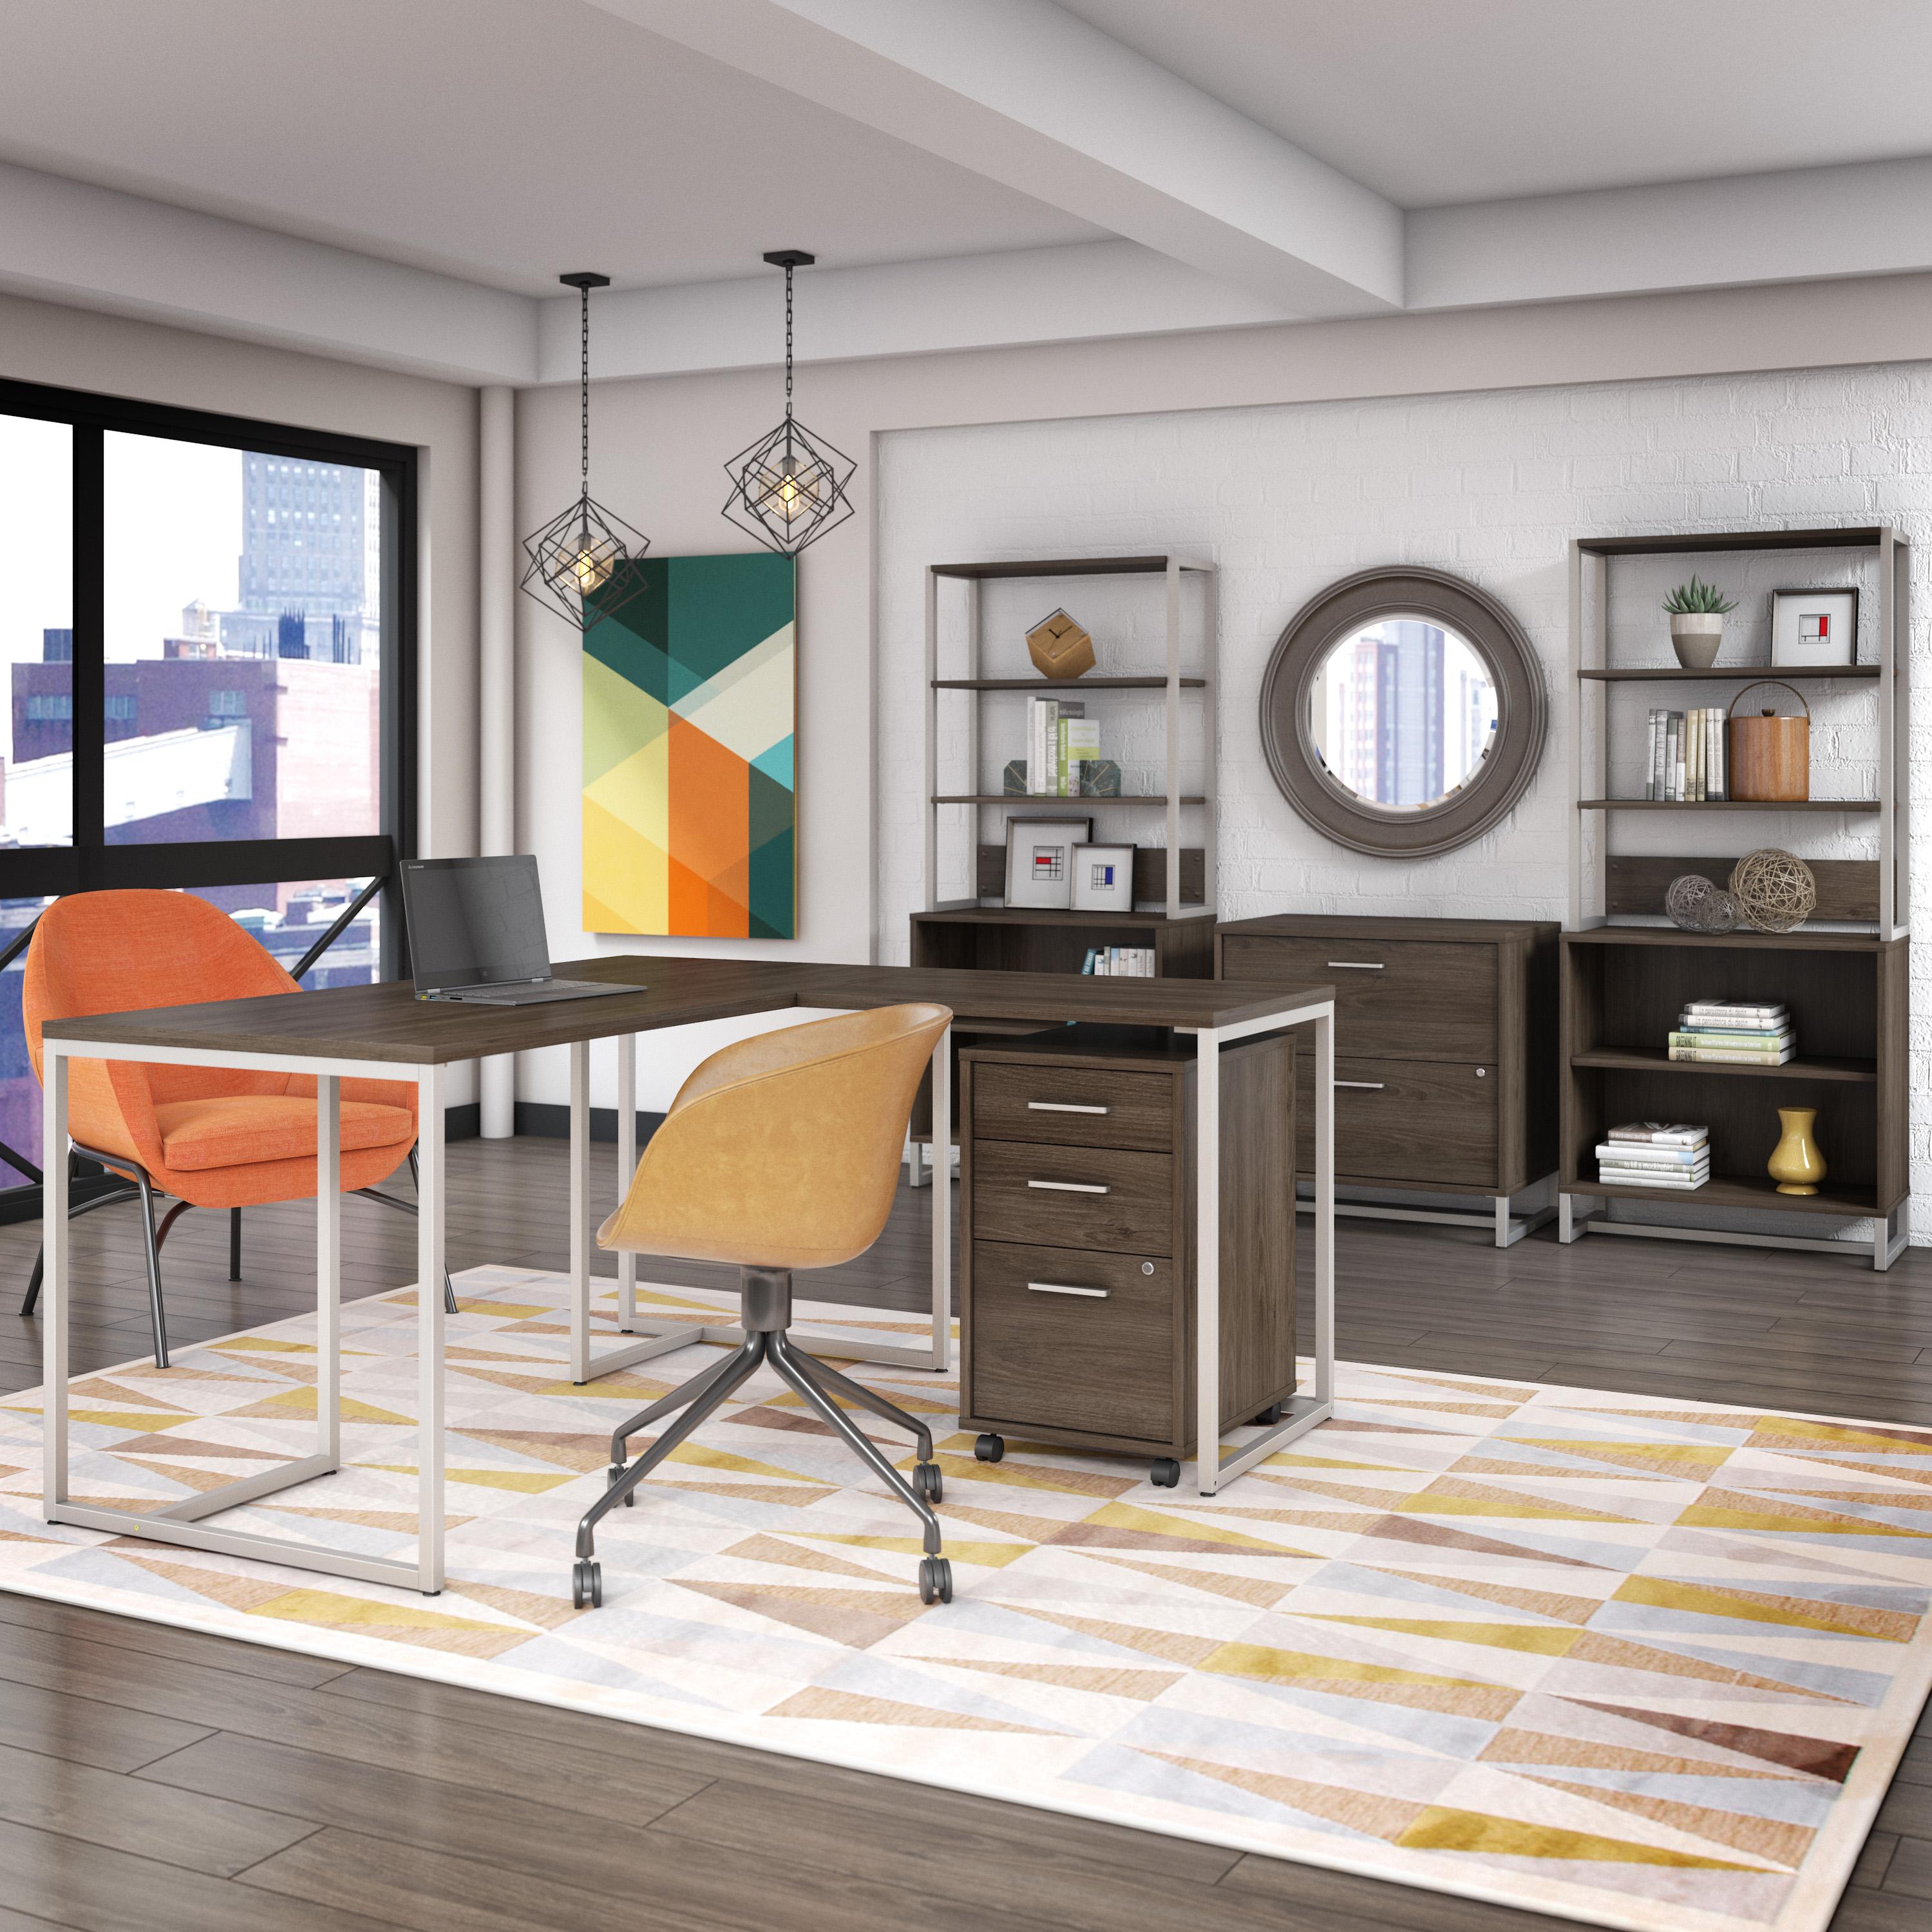 kathy ireland line expands into commercial furniture with bbf